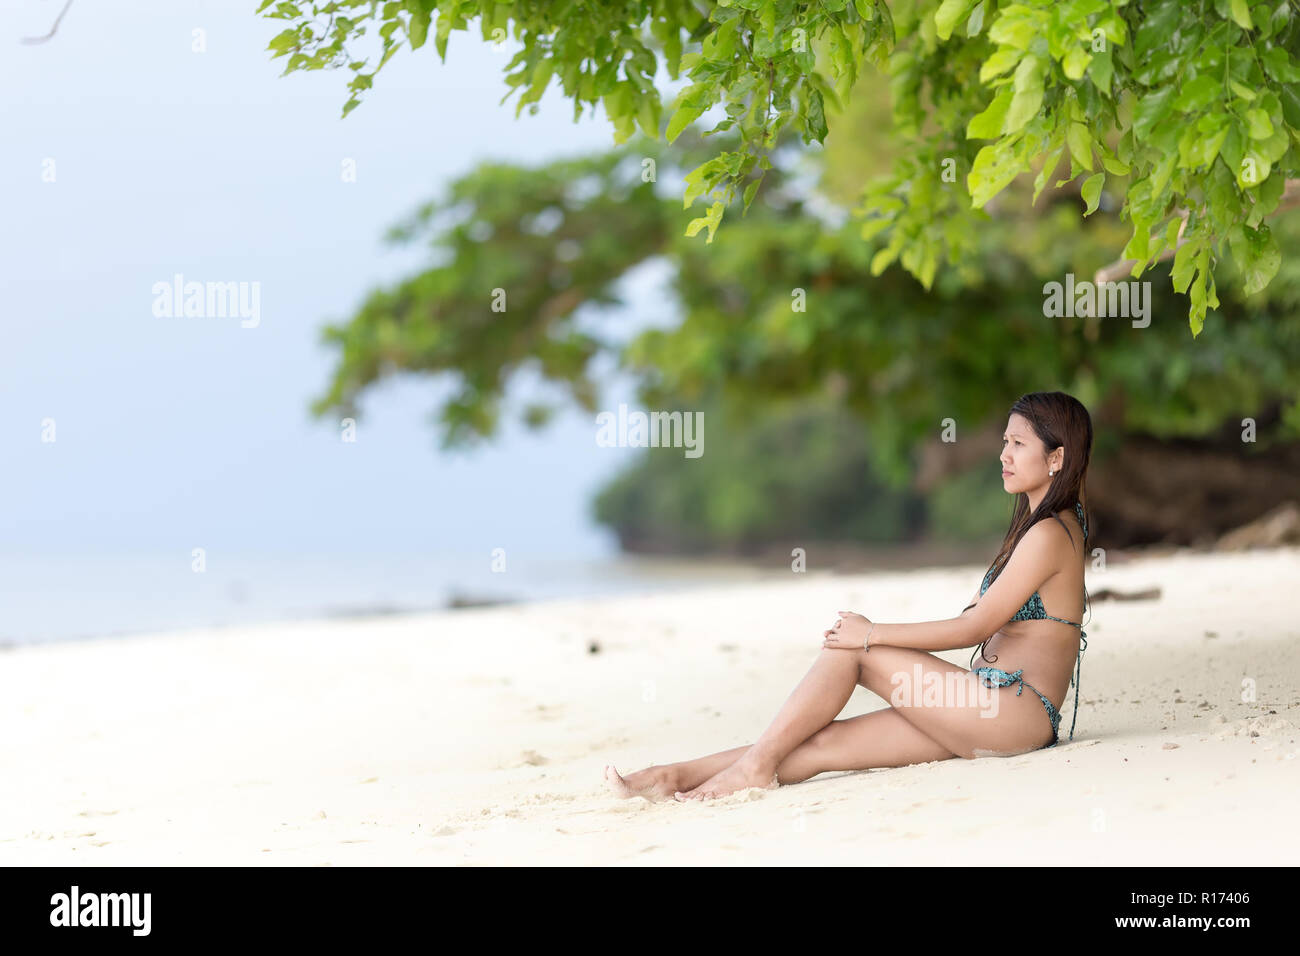 Beautiful Filipina woman sitting in her bikini on a tropical beach in her bikini on the golden sand in the shade of a green leafy tree looking out tow Stock Photo